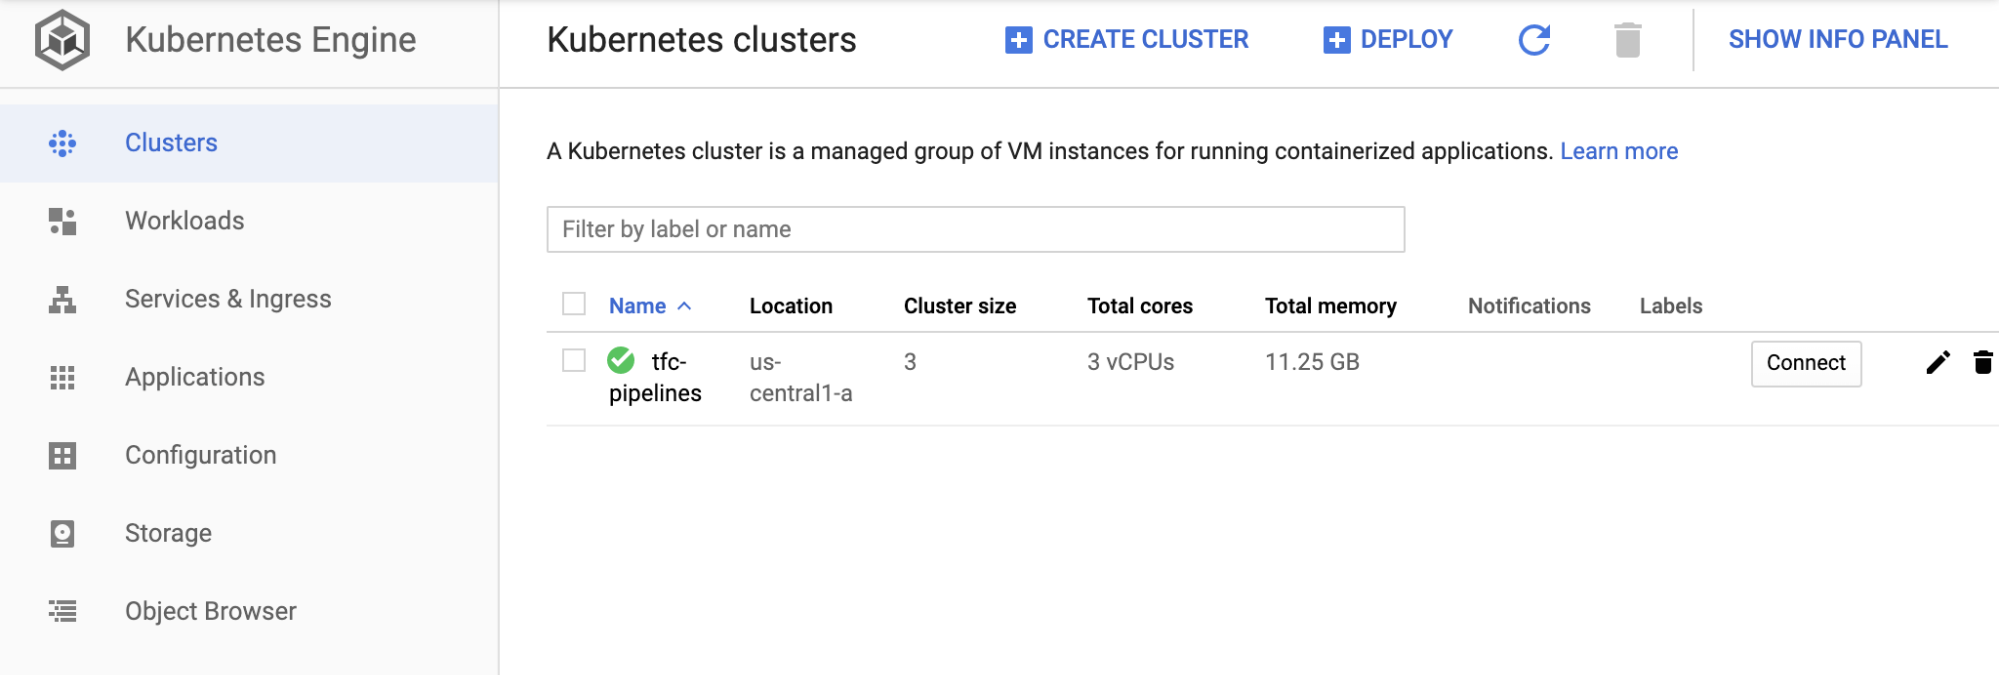 Google Cloud Kubernetes dashboard showing a GKE cluster named `tfc-pipelines` with 3 nodes